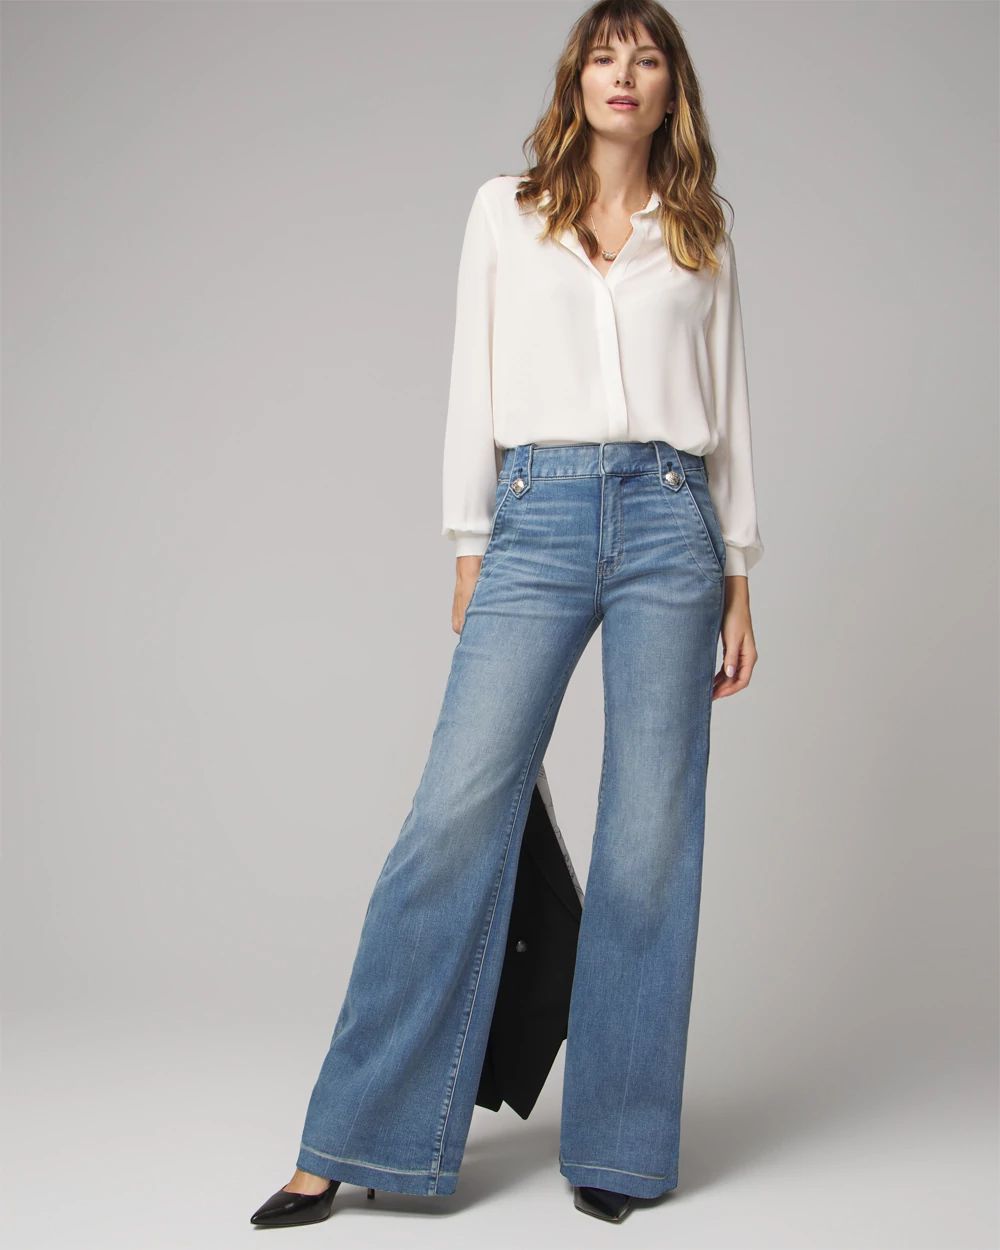 Petite High Rise Every Day Soft Novelty Button Wide Leg Pant click to view larger image.